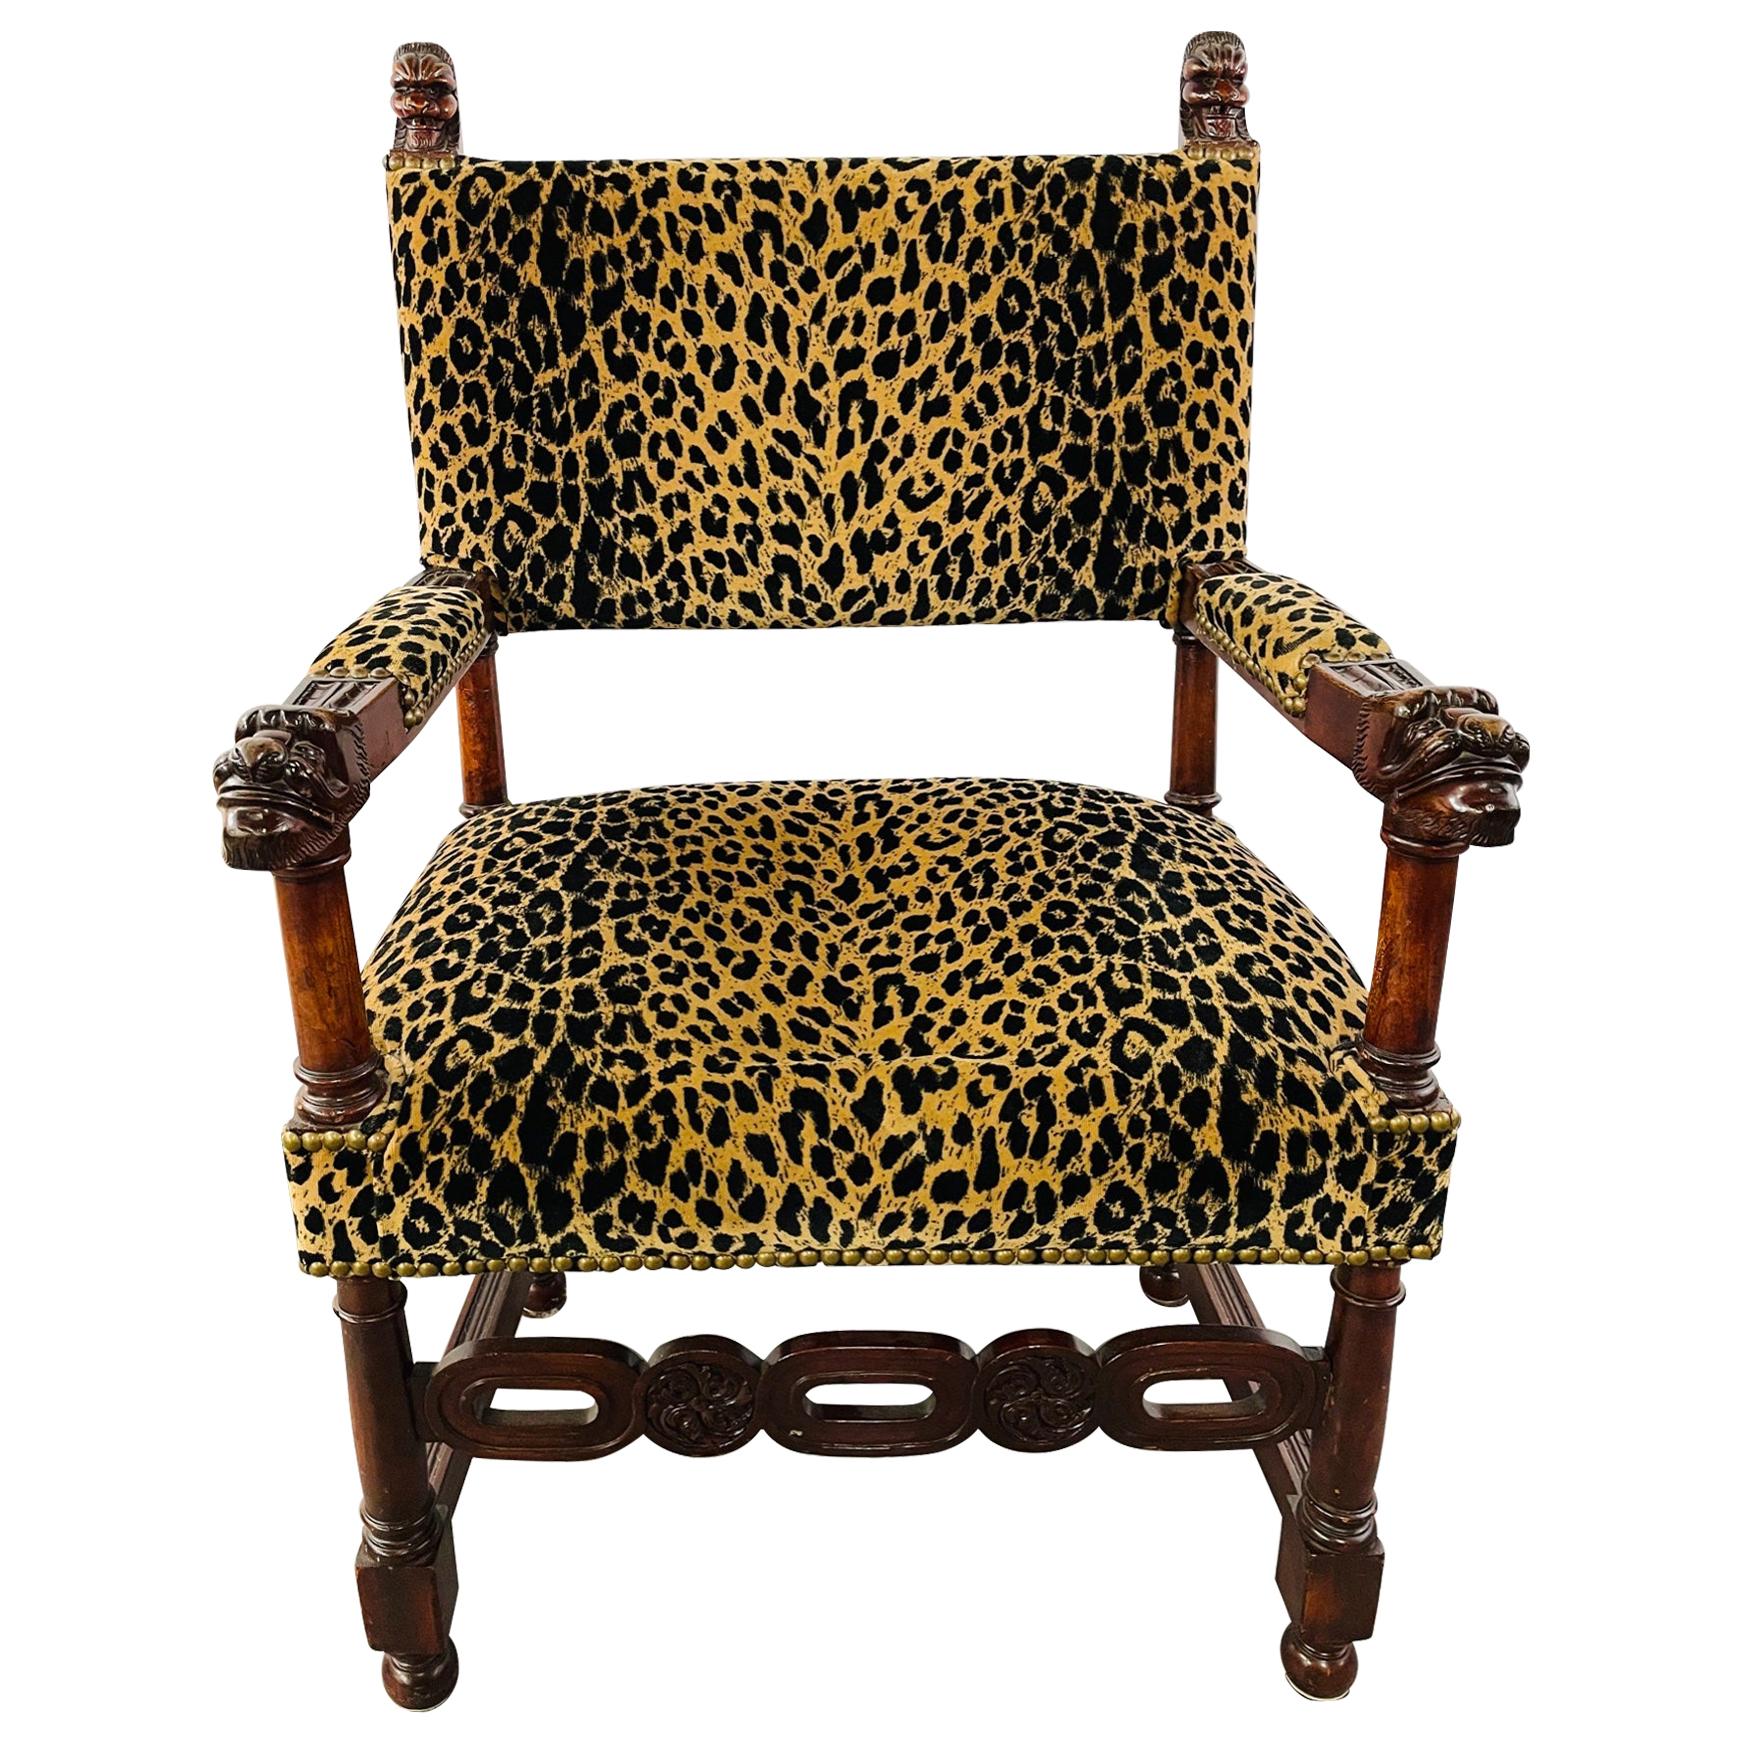 Late 19th Century Victorian Gothic Revival Leopard Upholstery Arm or Side Chair For Sale